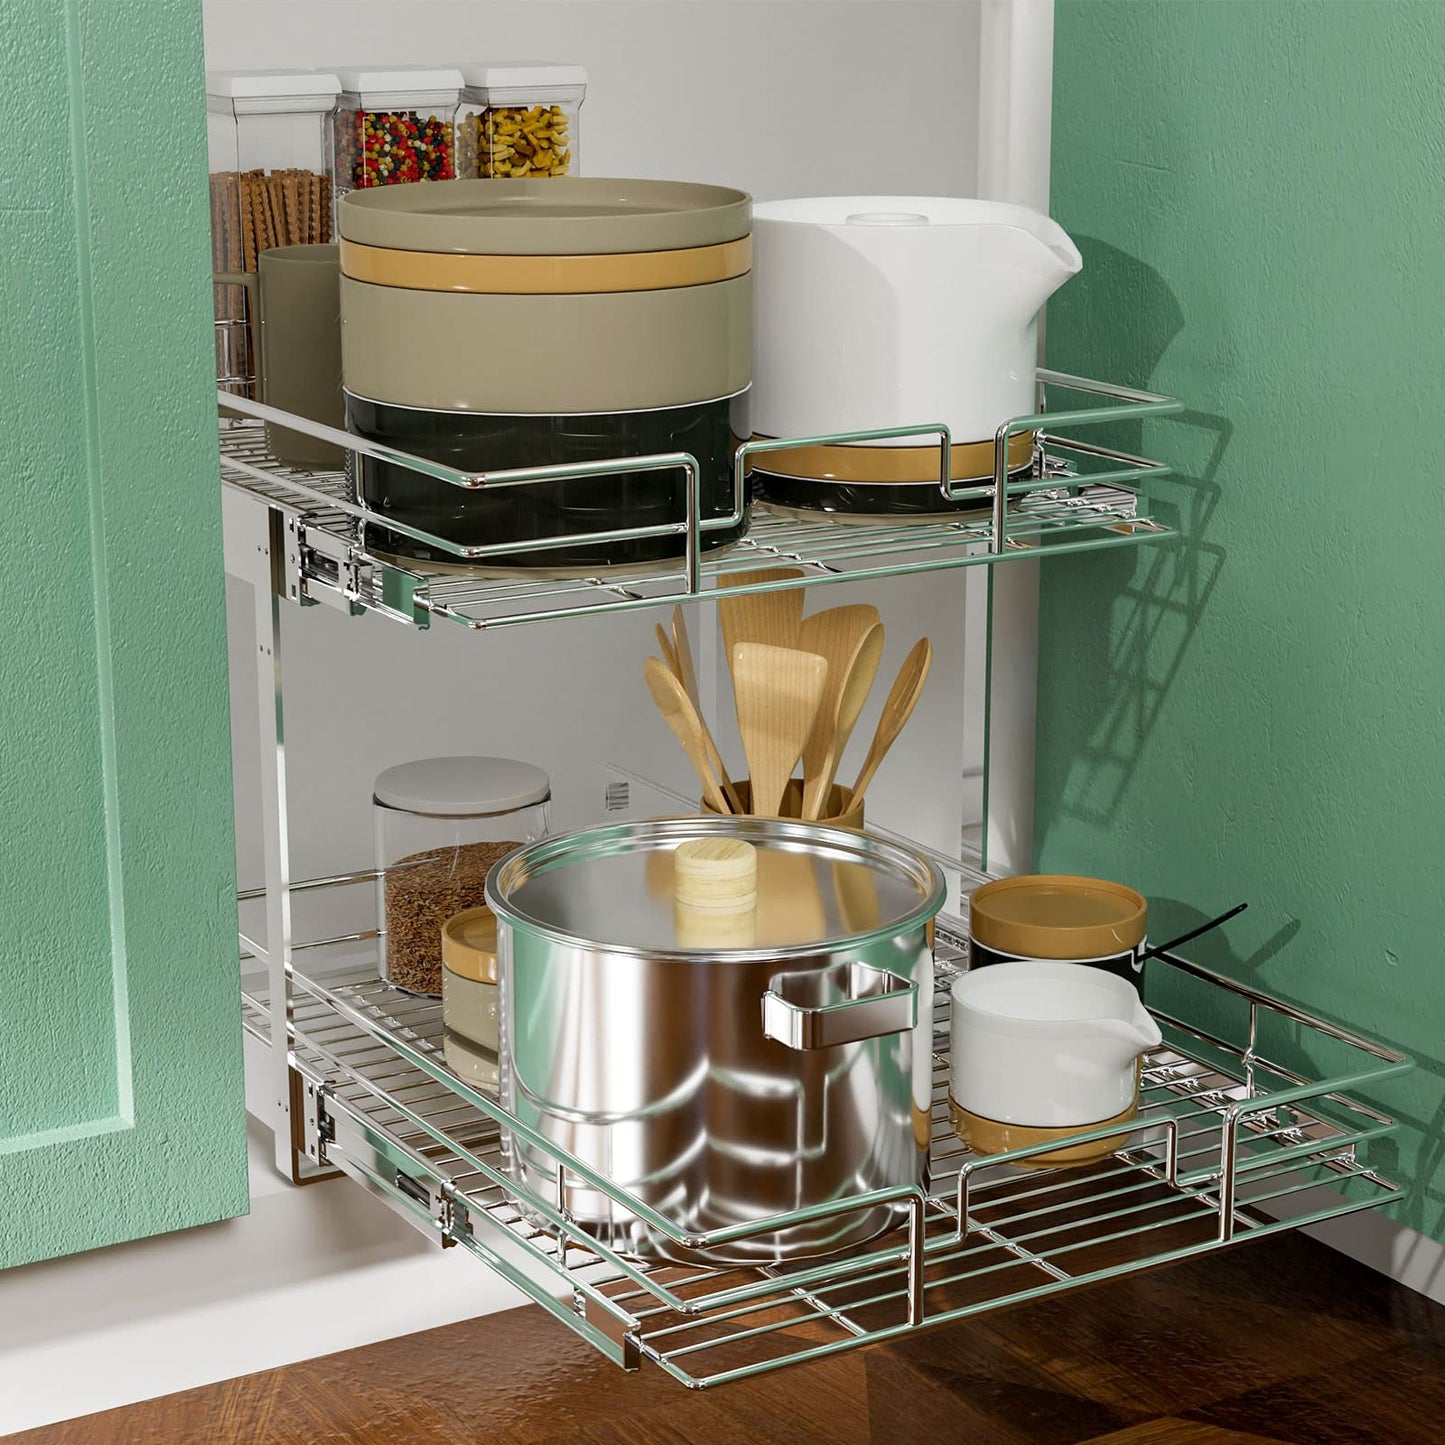 2 Tier Individual Pull Out Drawers For Kitchen Cabinets